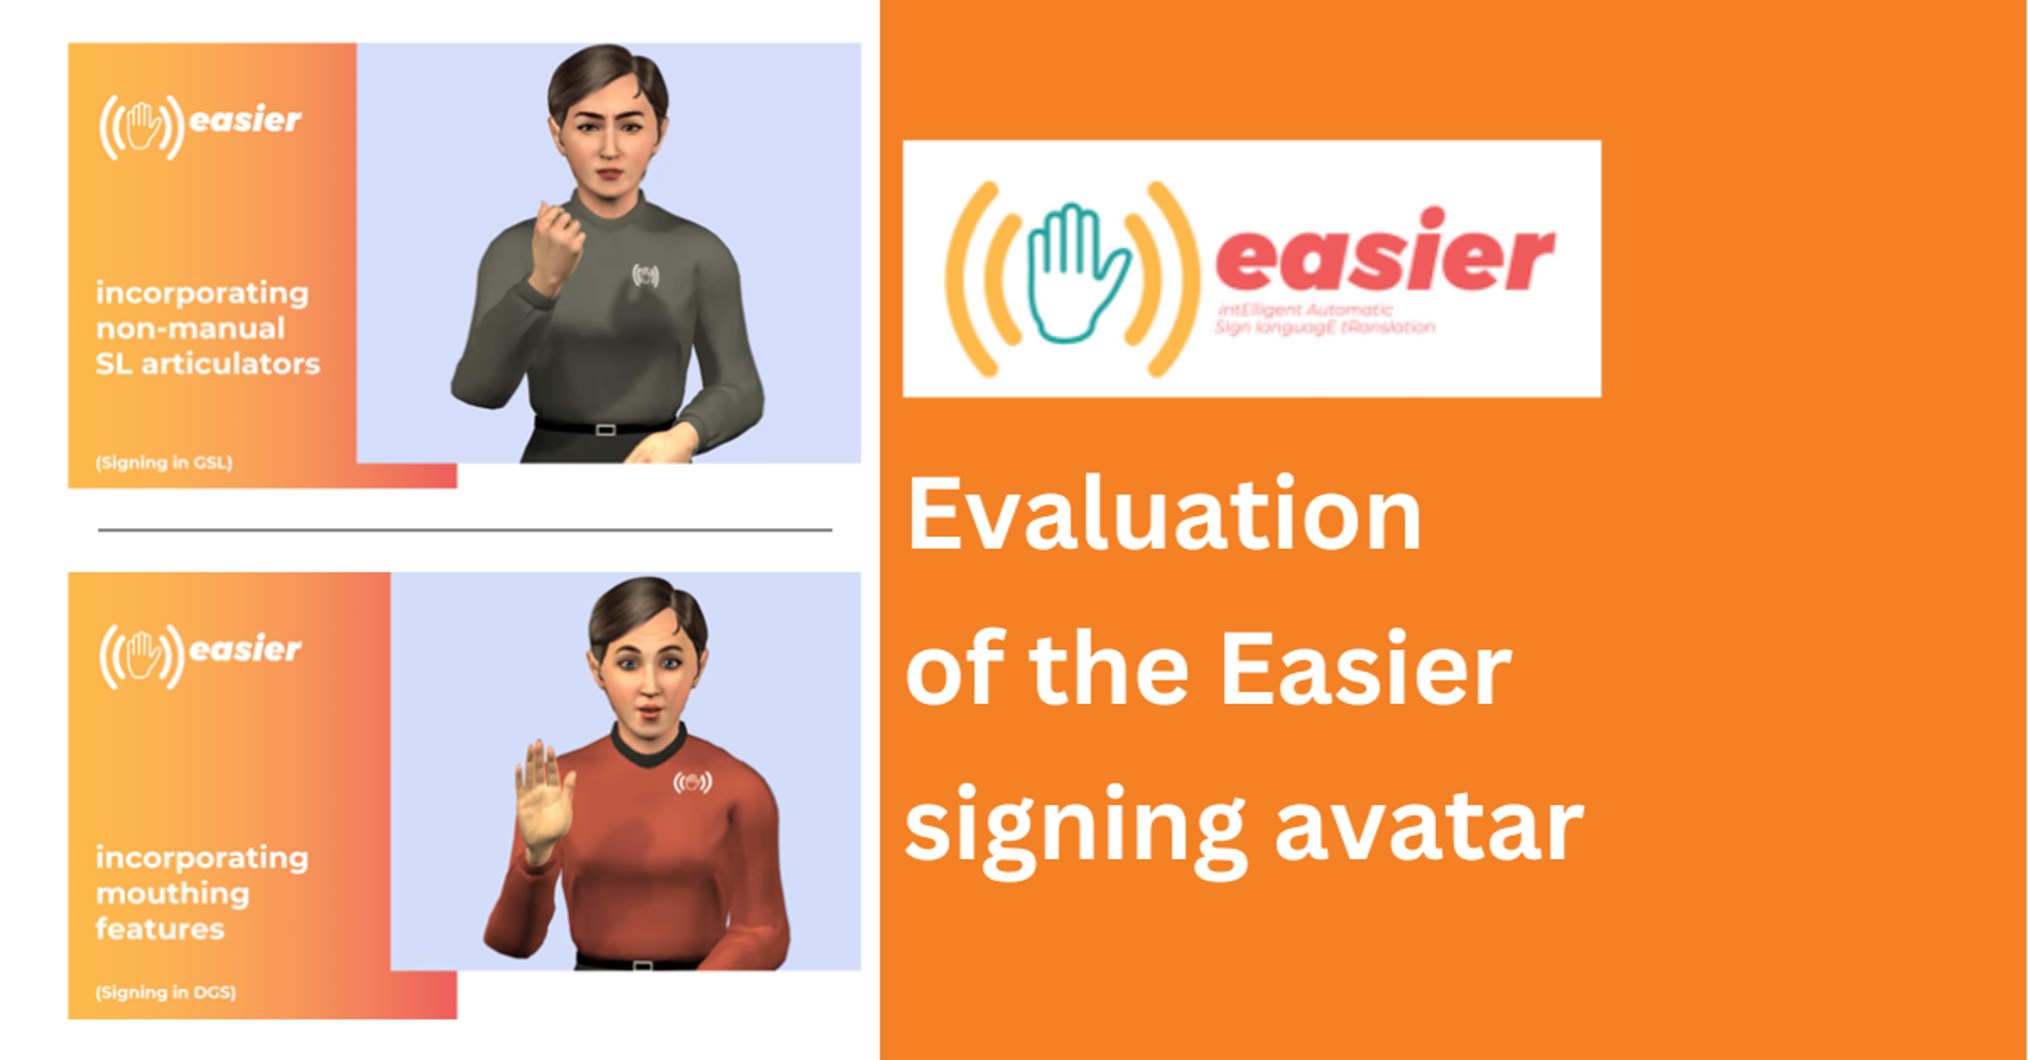 Evaluation of the EASIER signing avatar